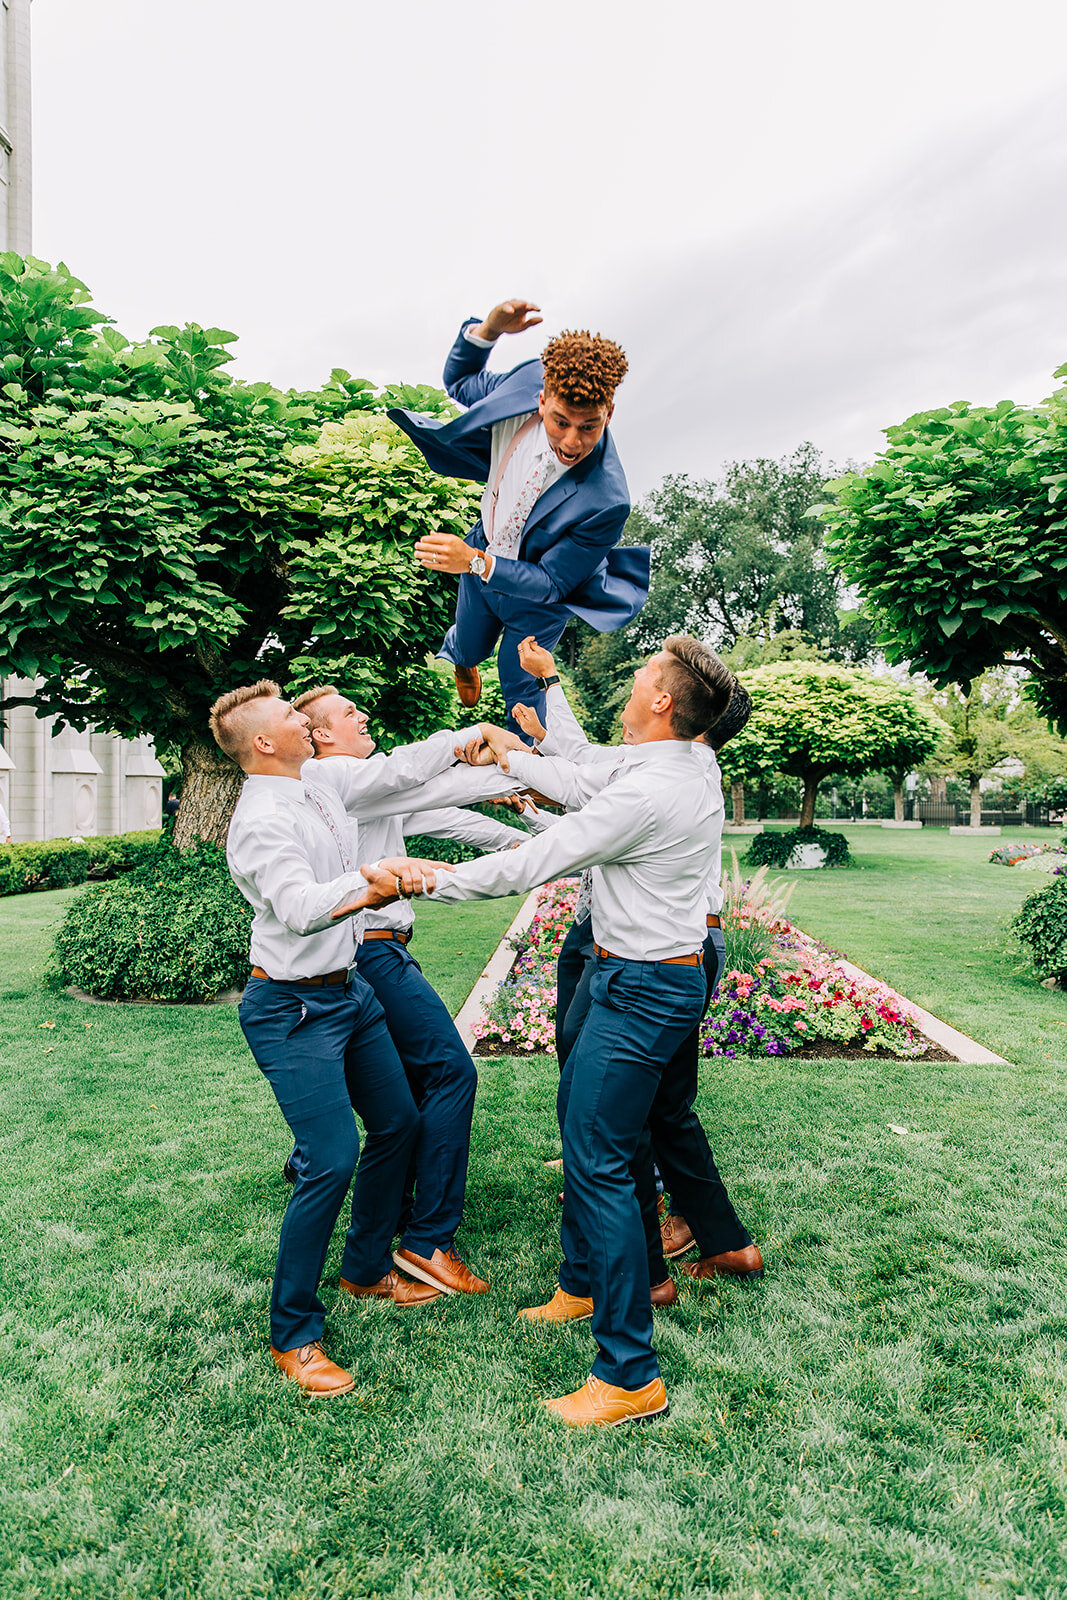  pose idea groomsmen throwing groom up in the air wedding day pictures of groomsmen tossing groom blue suit navy suit pants wedding party attire ideas inspo for wedding style blue pants with white shirts and floral ties young couple lds bride and gro